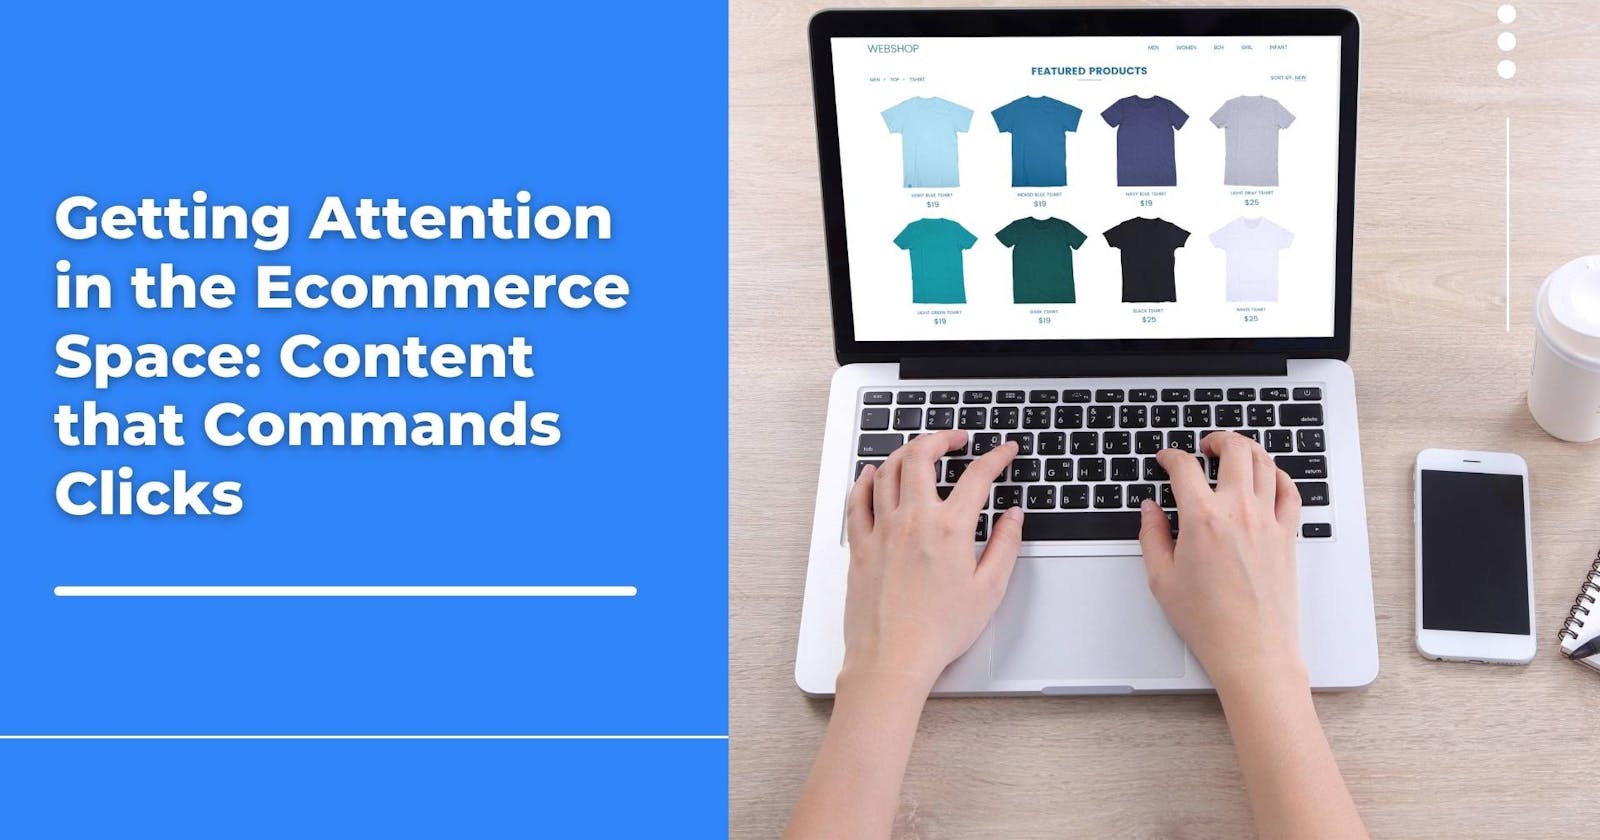 Getting Attention in the Ecommerce Space: Content that Commands Clicks